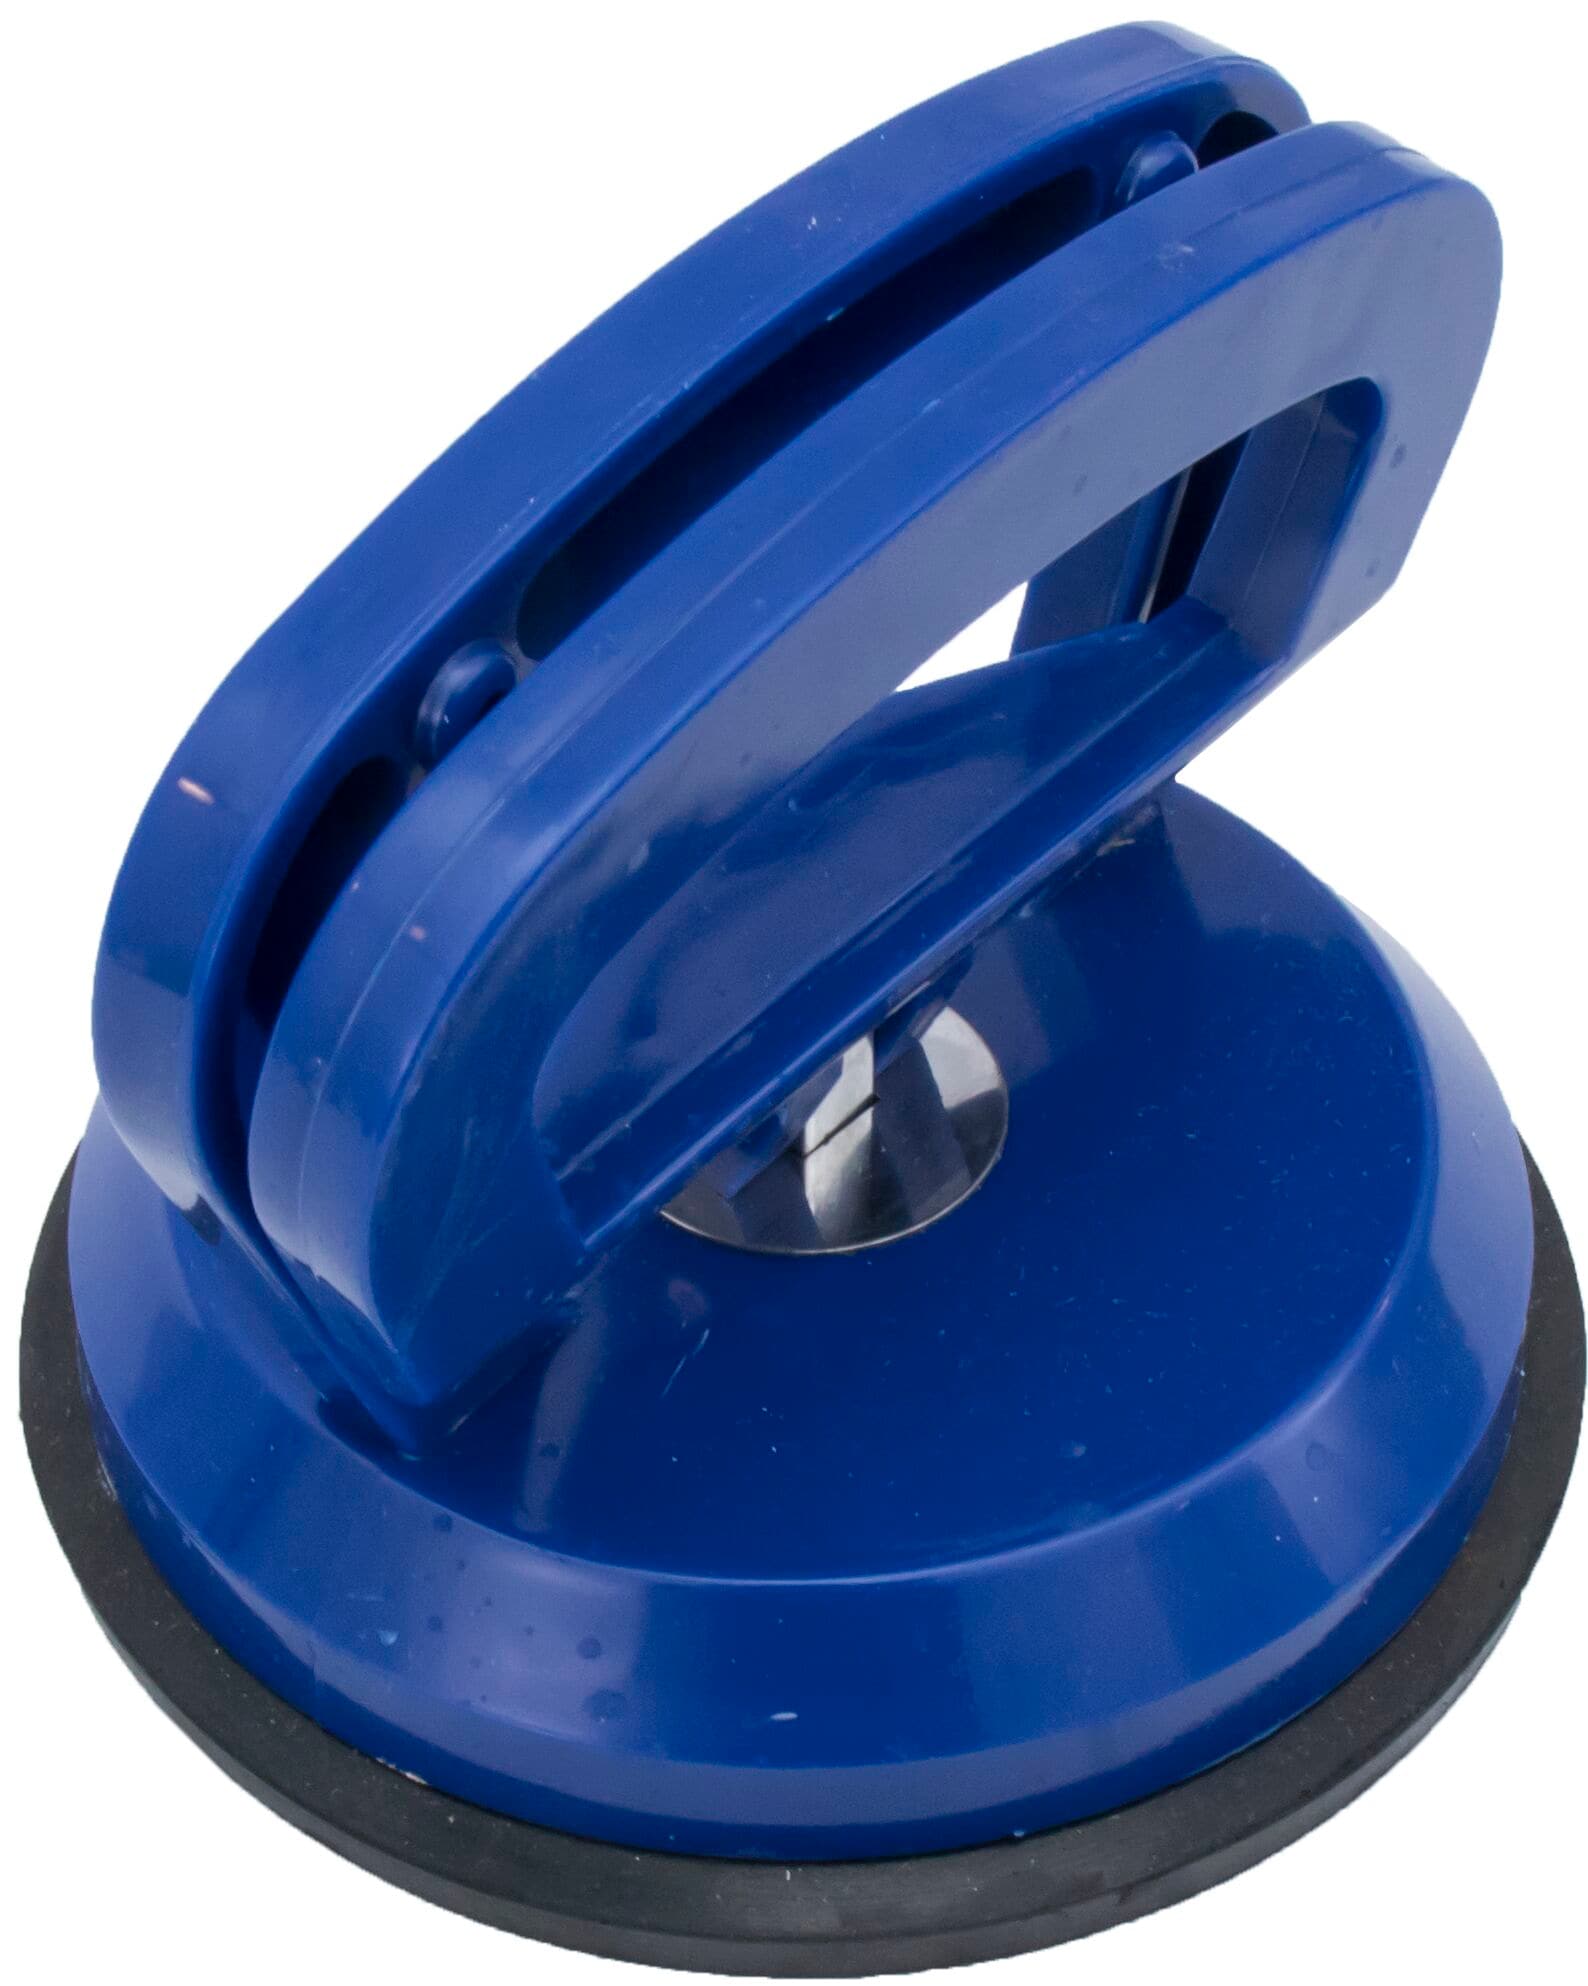 2-1/4 in., 15 lb. Suction Cup Lifter